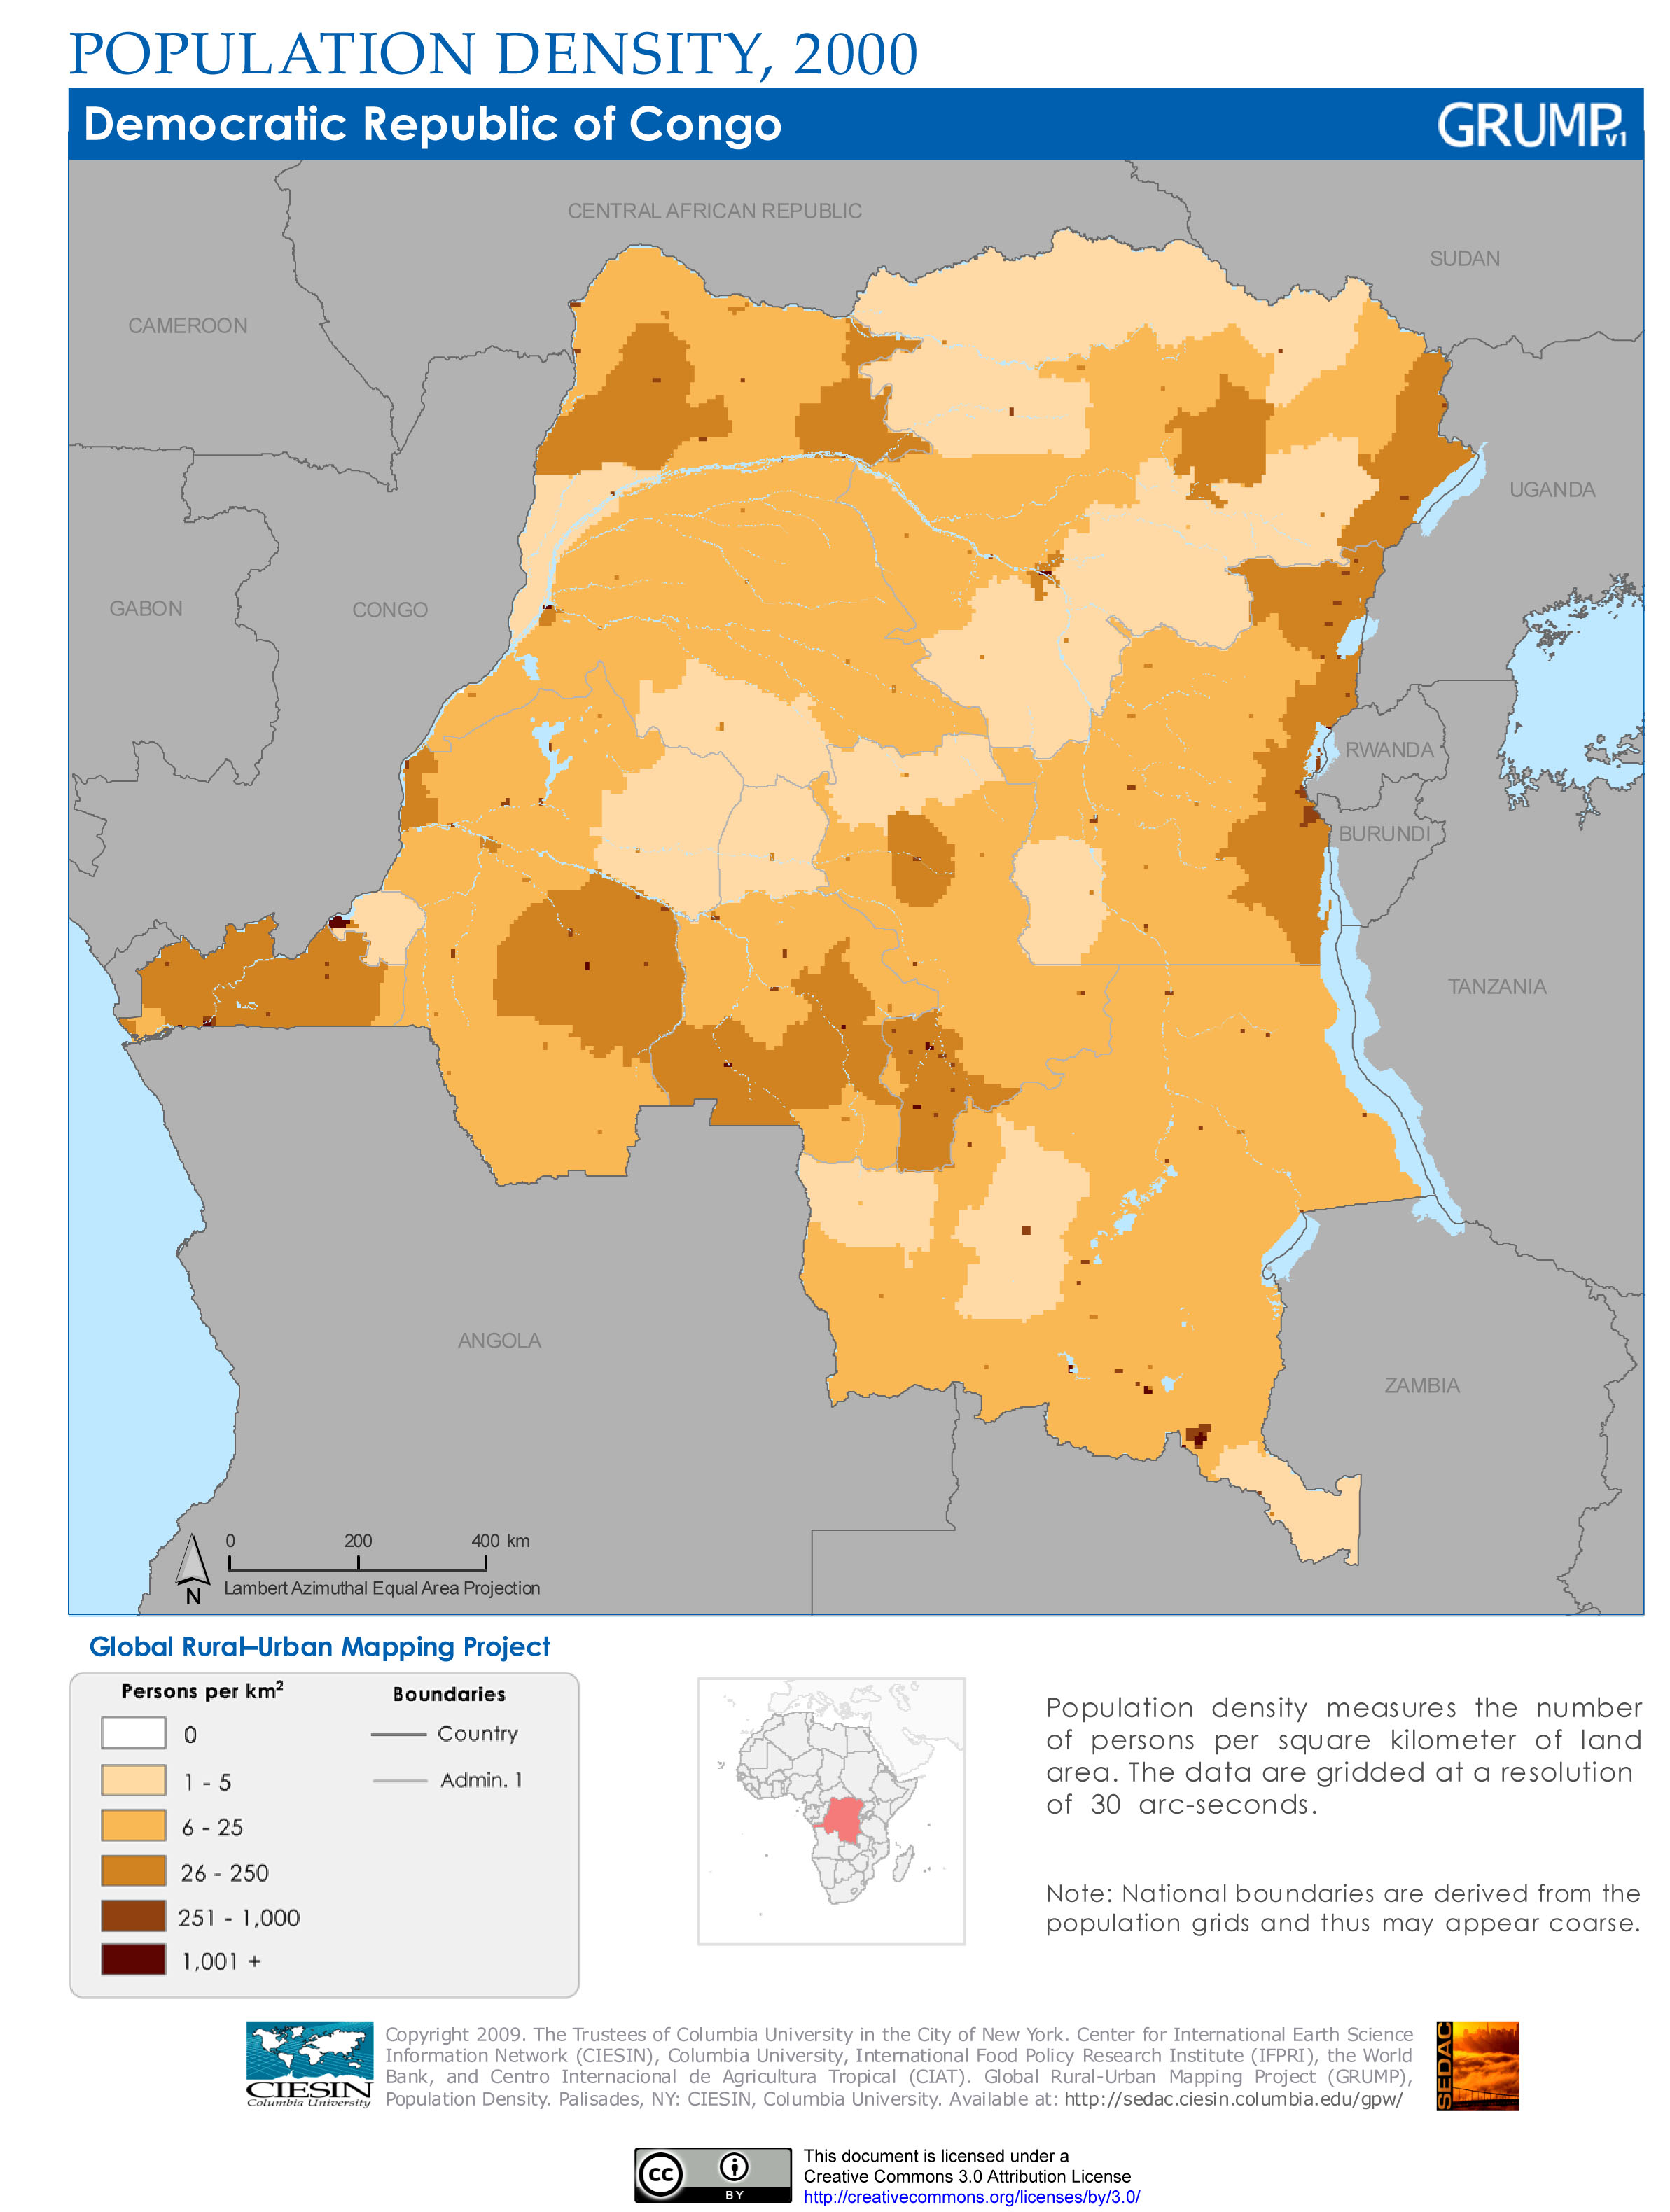 Moving Forward: Recommendations for Belgium to Support Congo in Confronting its Colonial Past